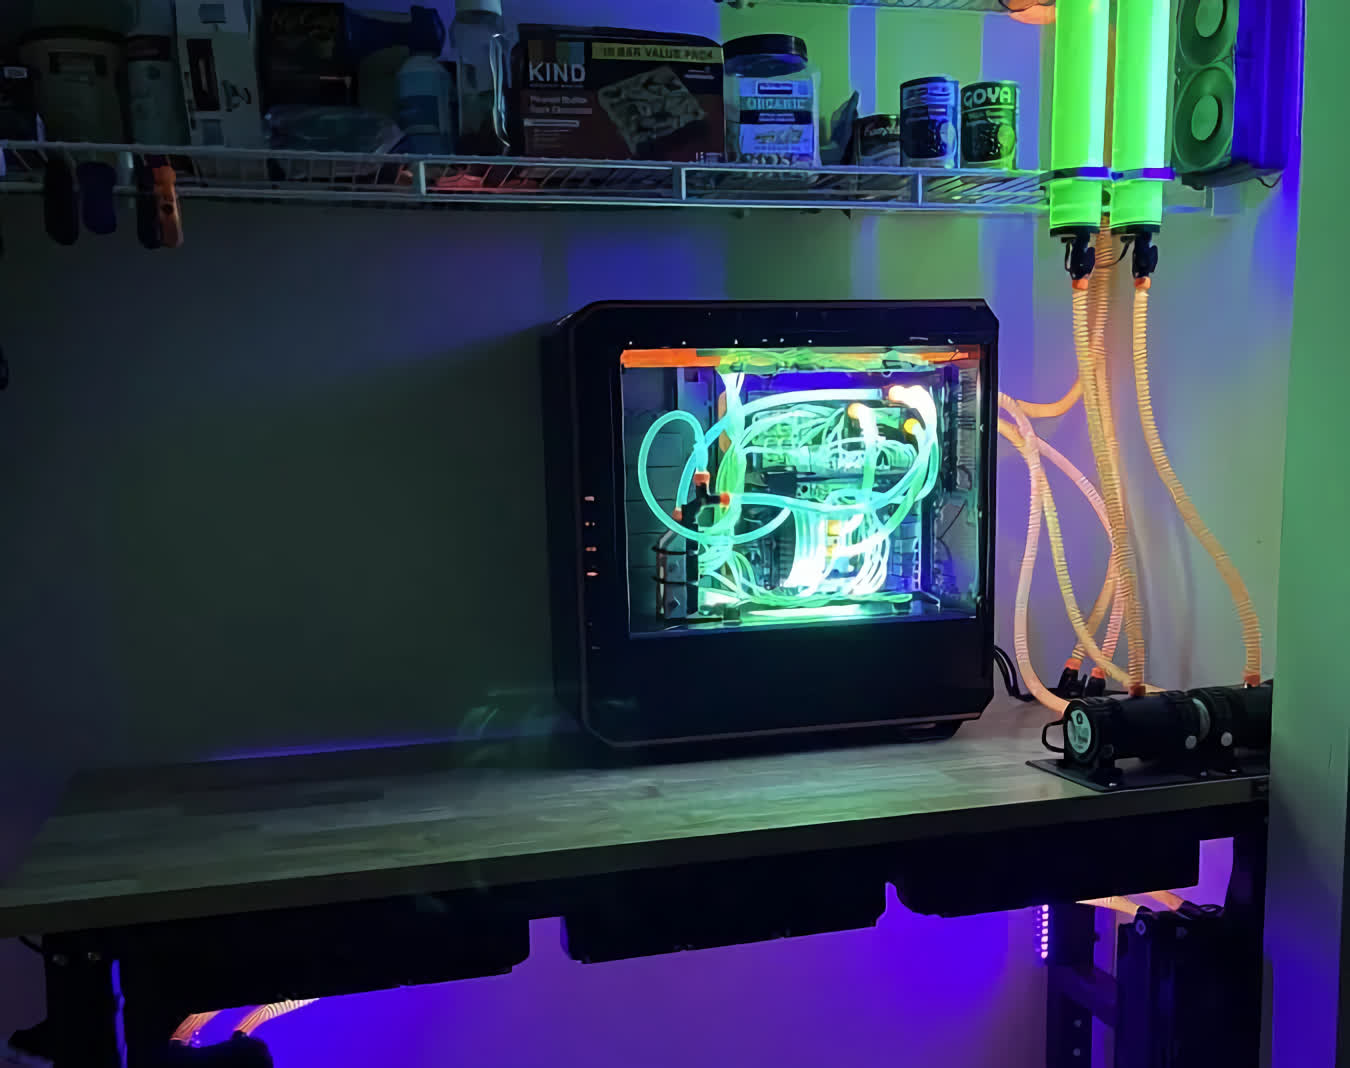 Take a look at this liquid-cooled PC with 69 water blocks and 100 feet of tubing